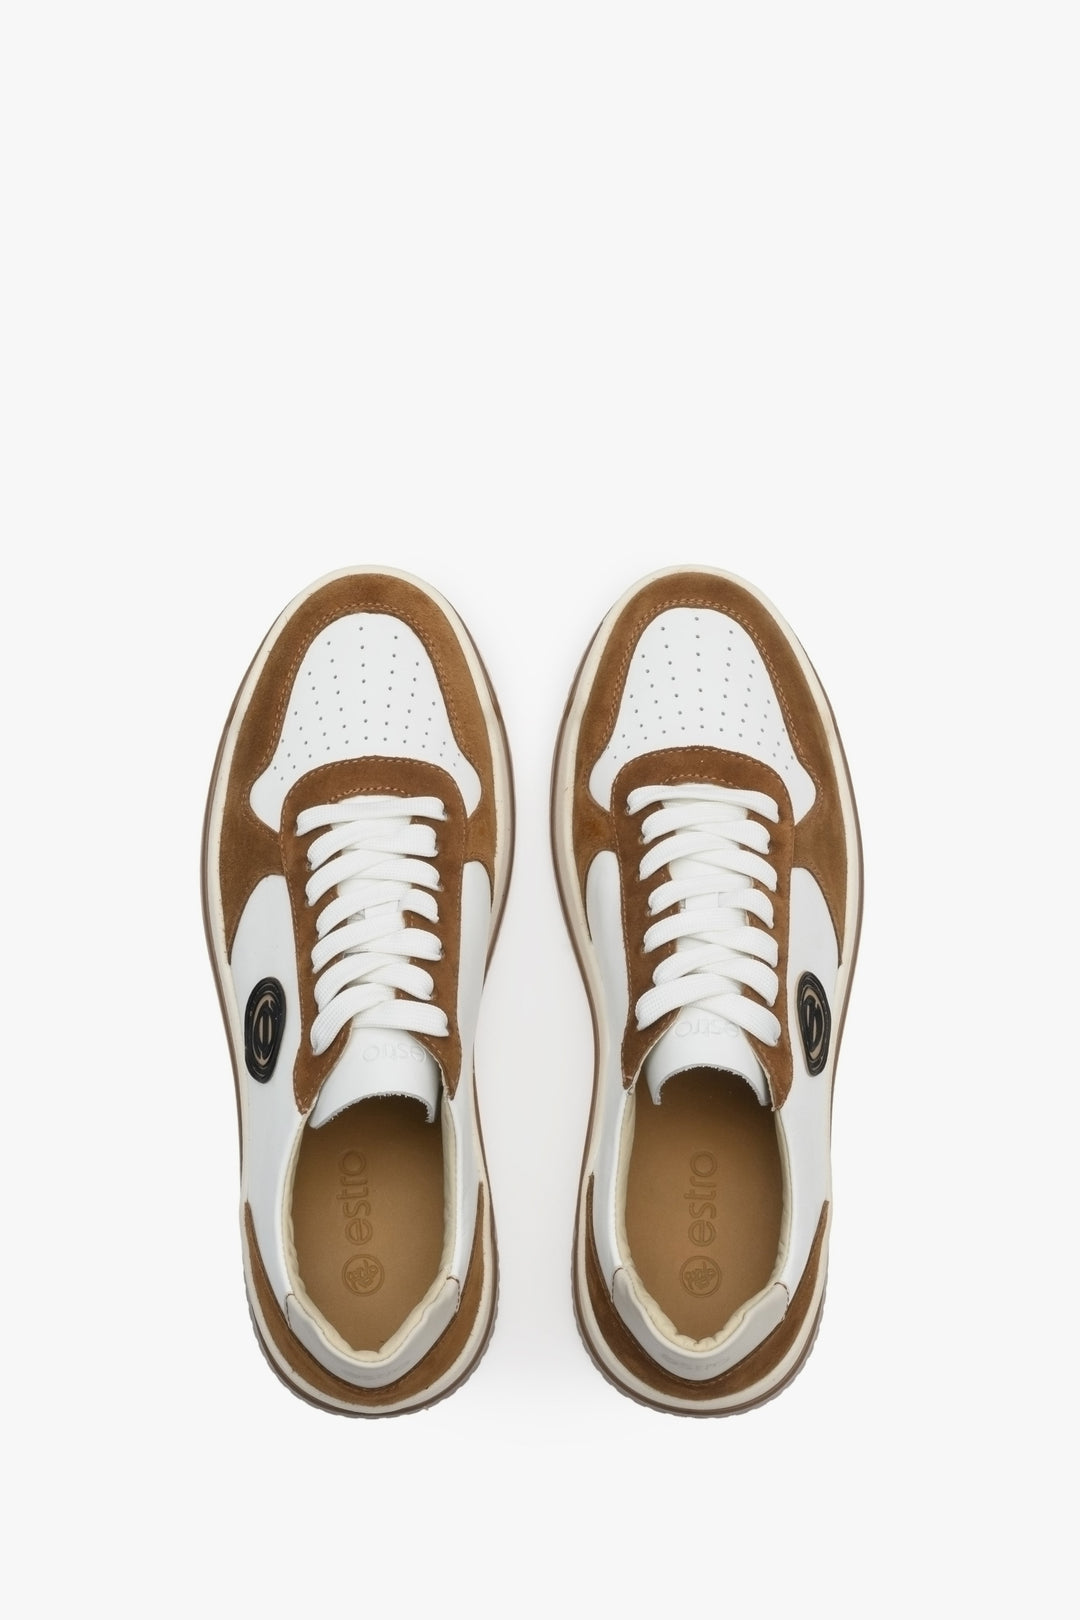 Men's brown and white leather and suede Estro sneakers for spring - presentation of the model from above.